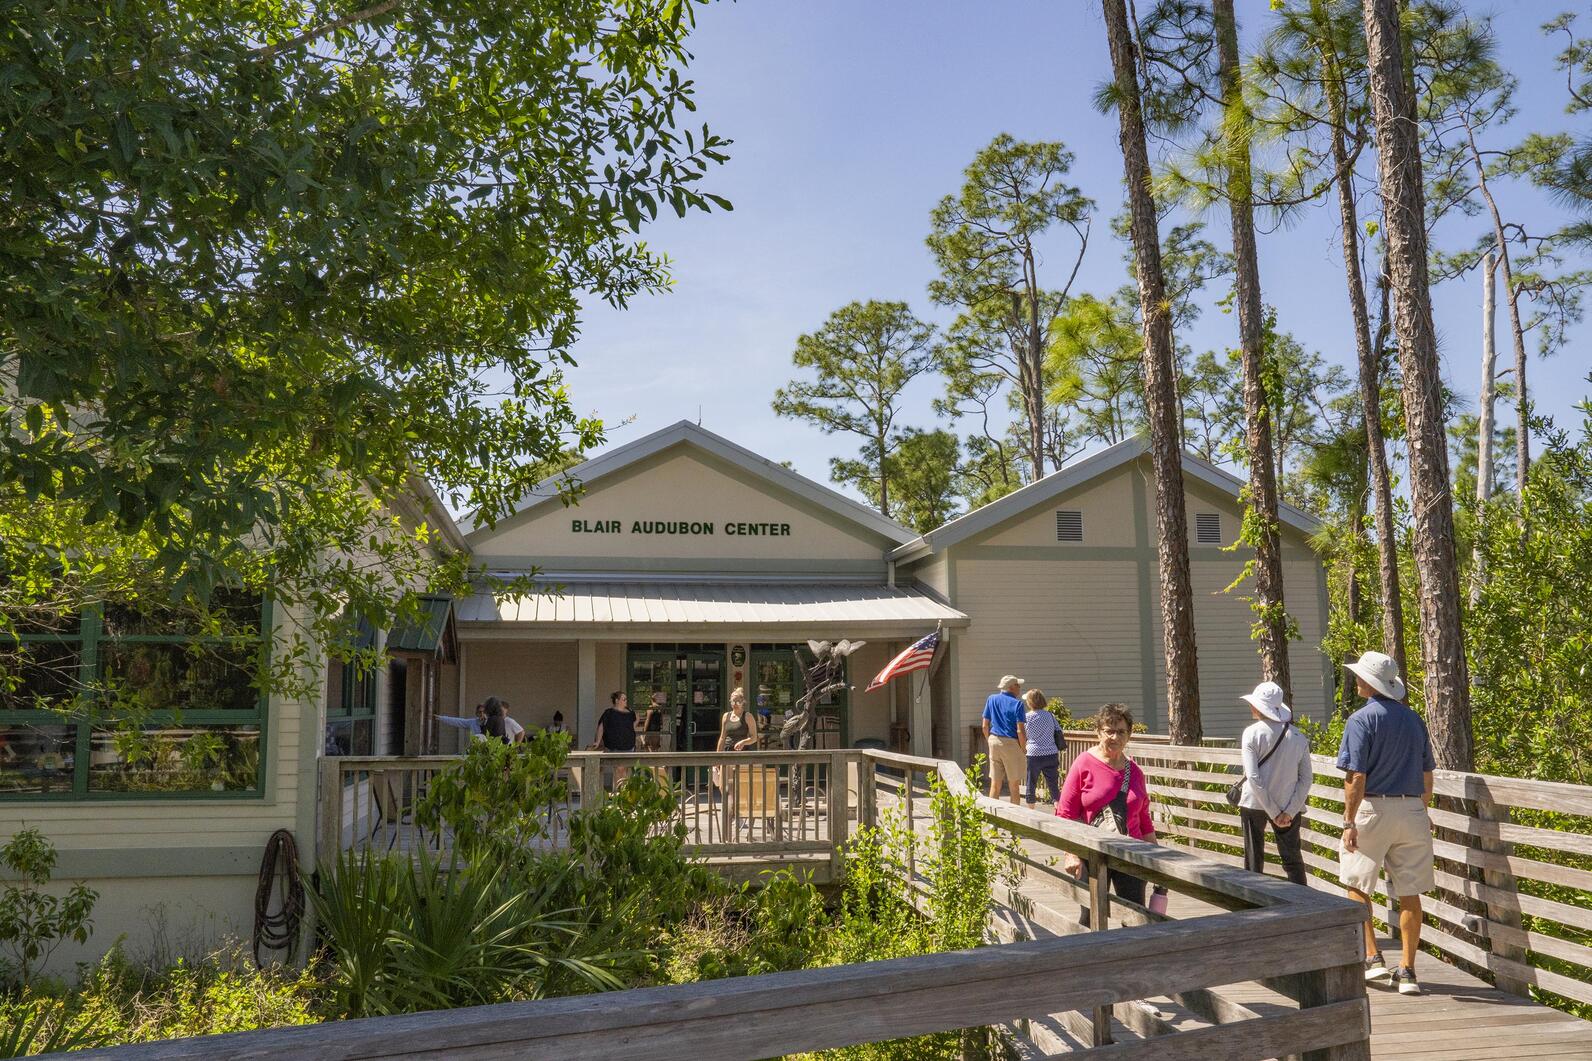 Photo of the visitor center exterior with people coming and going on the boardwalk.